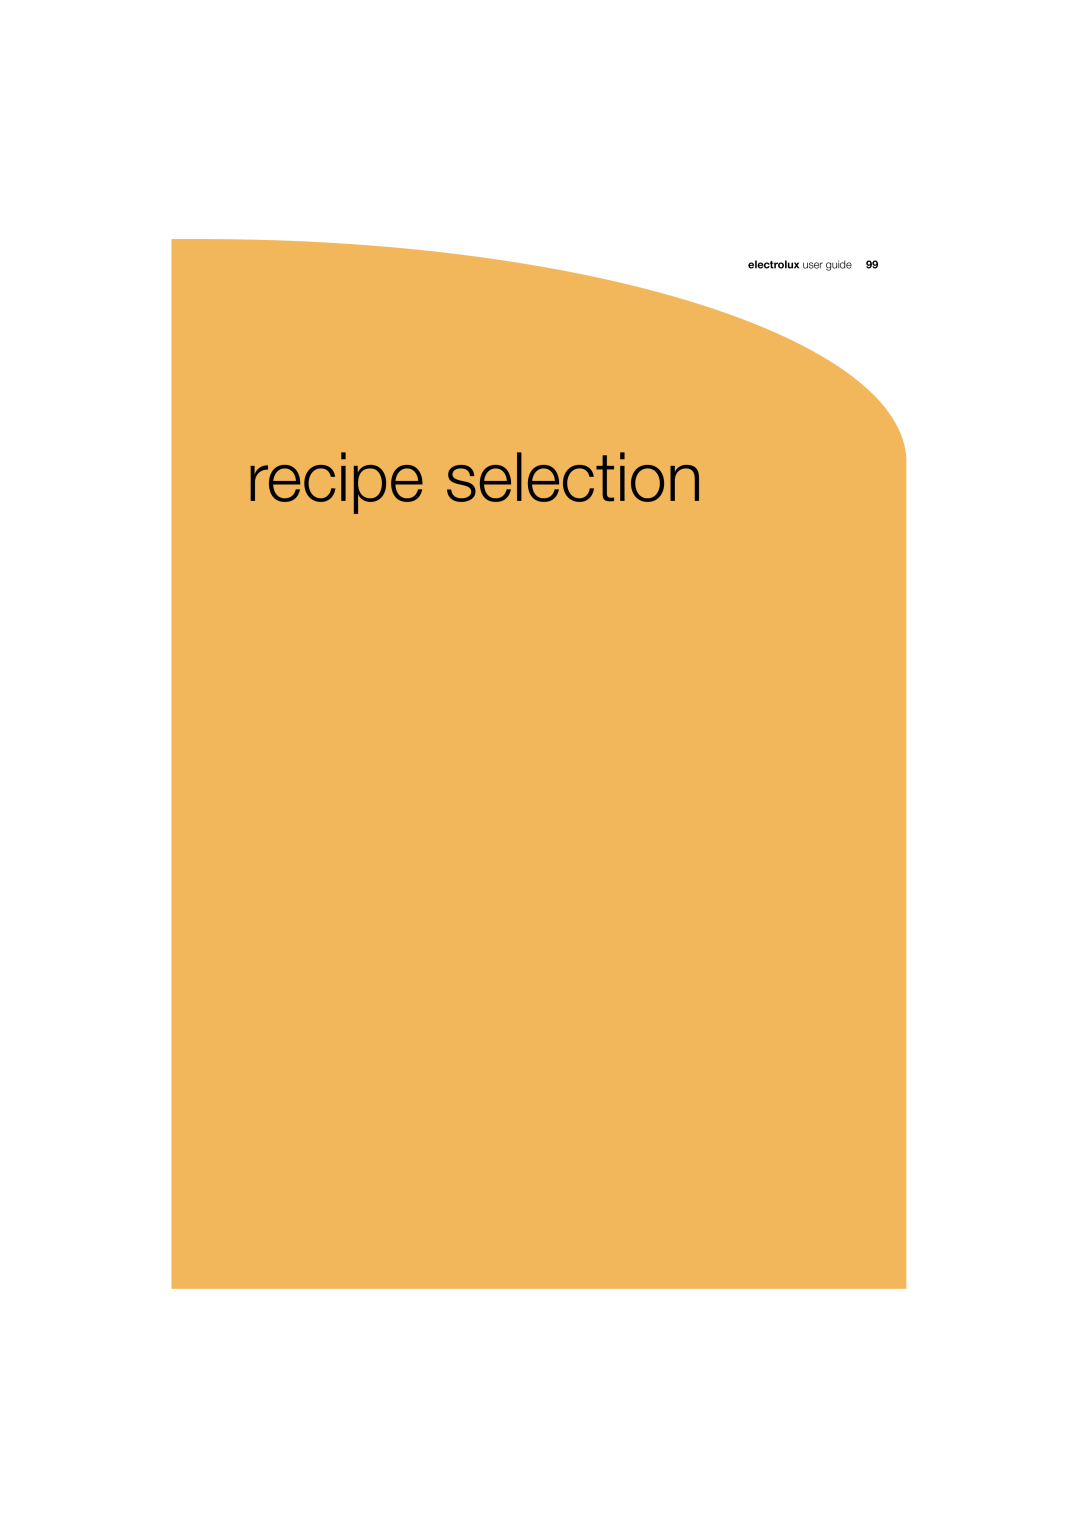 Electrolux 180 manual recipe selection, electrolux user guide 